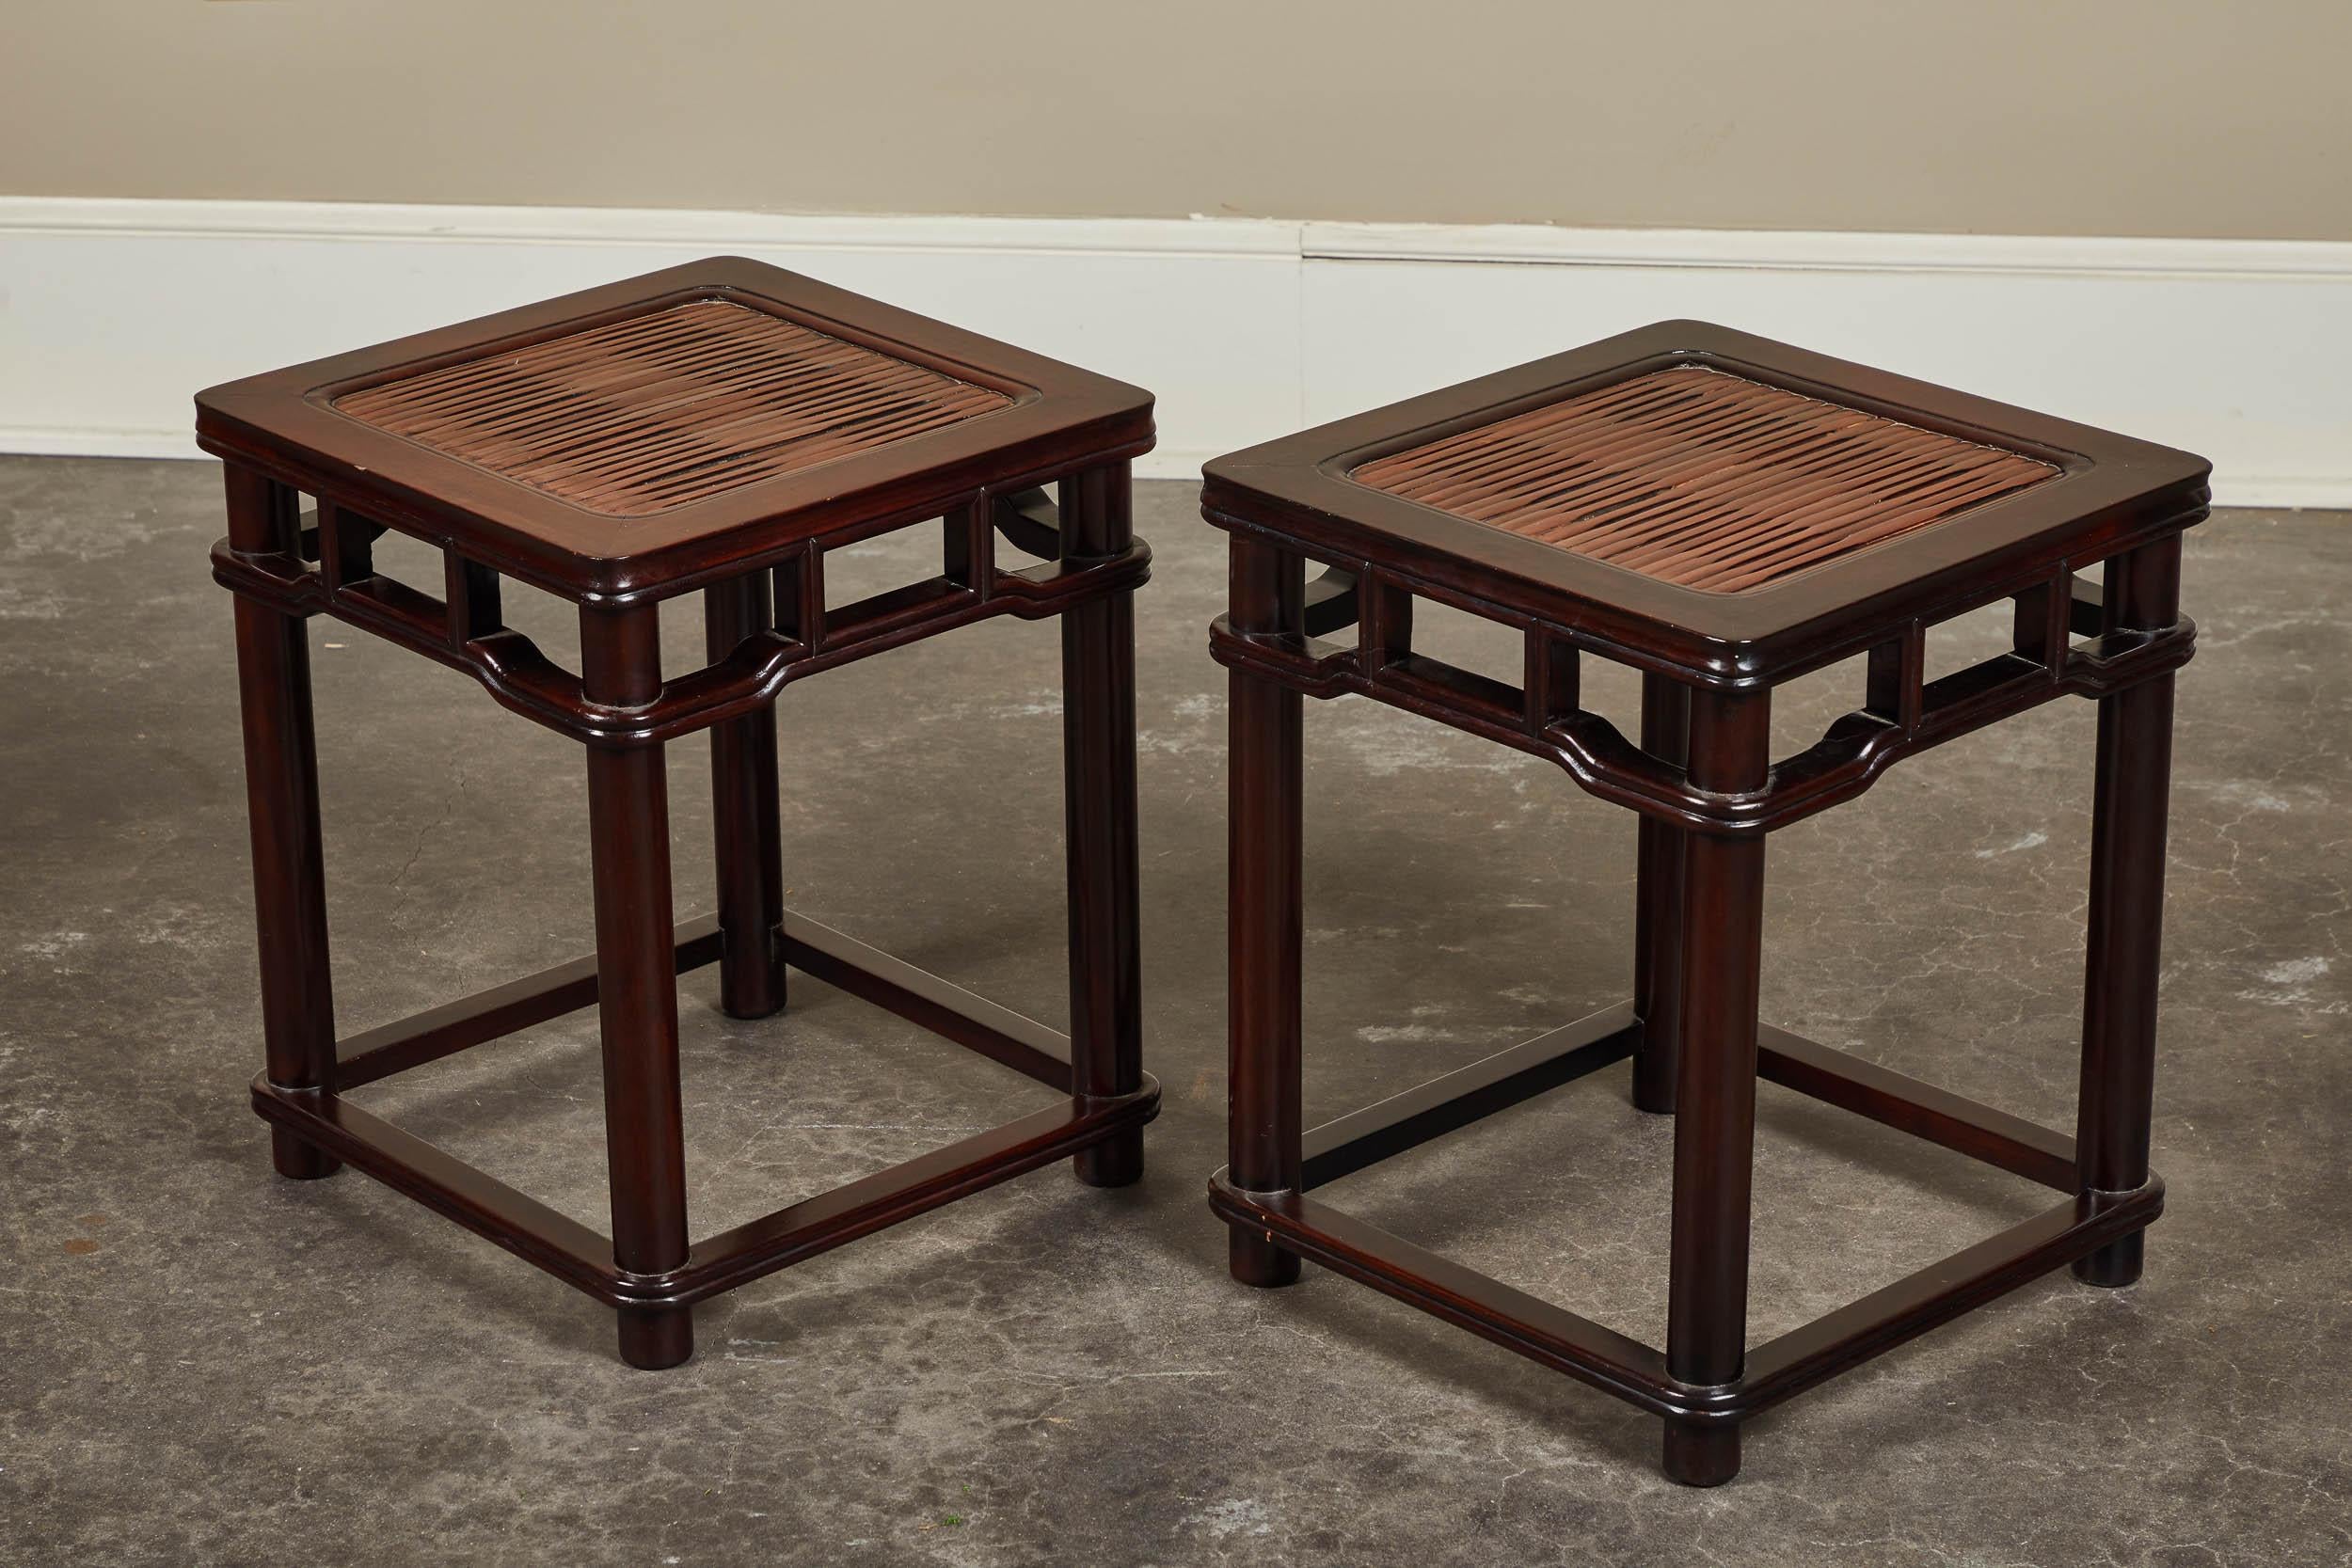 Chinese Export Pair of 18th Century Chinese Iron Wood Tables W/ Slated Bamboo Tops